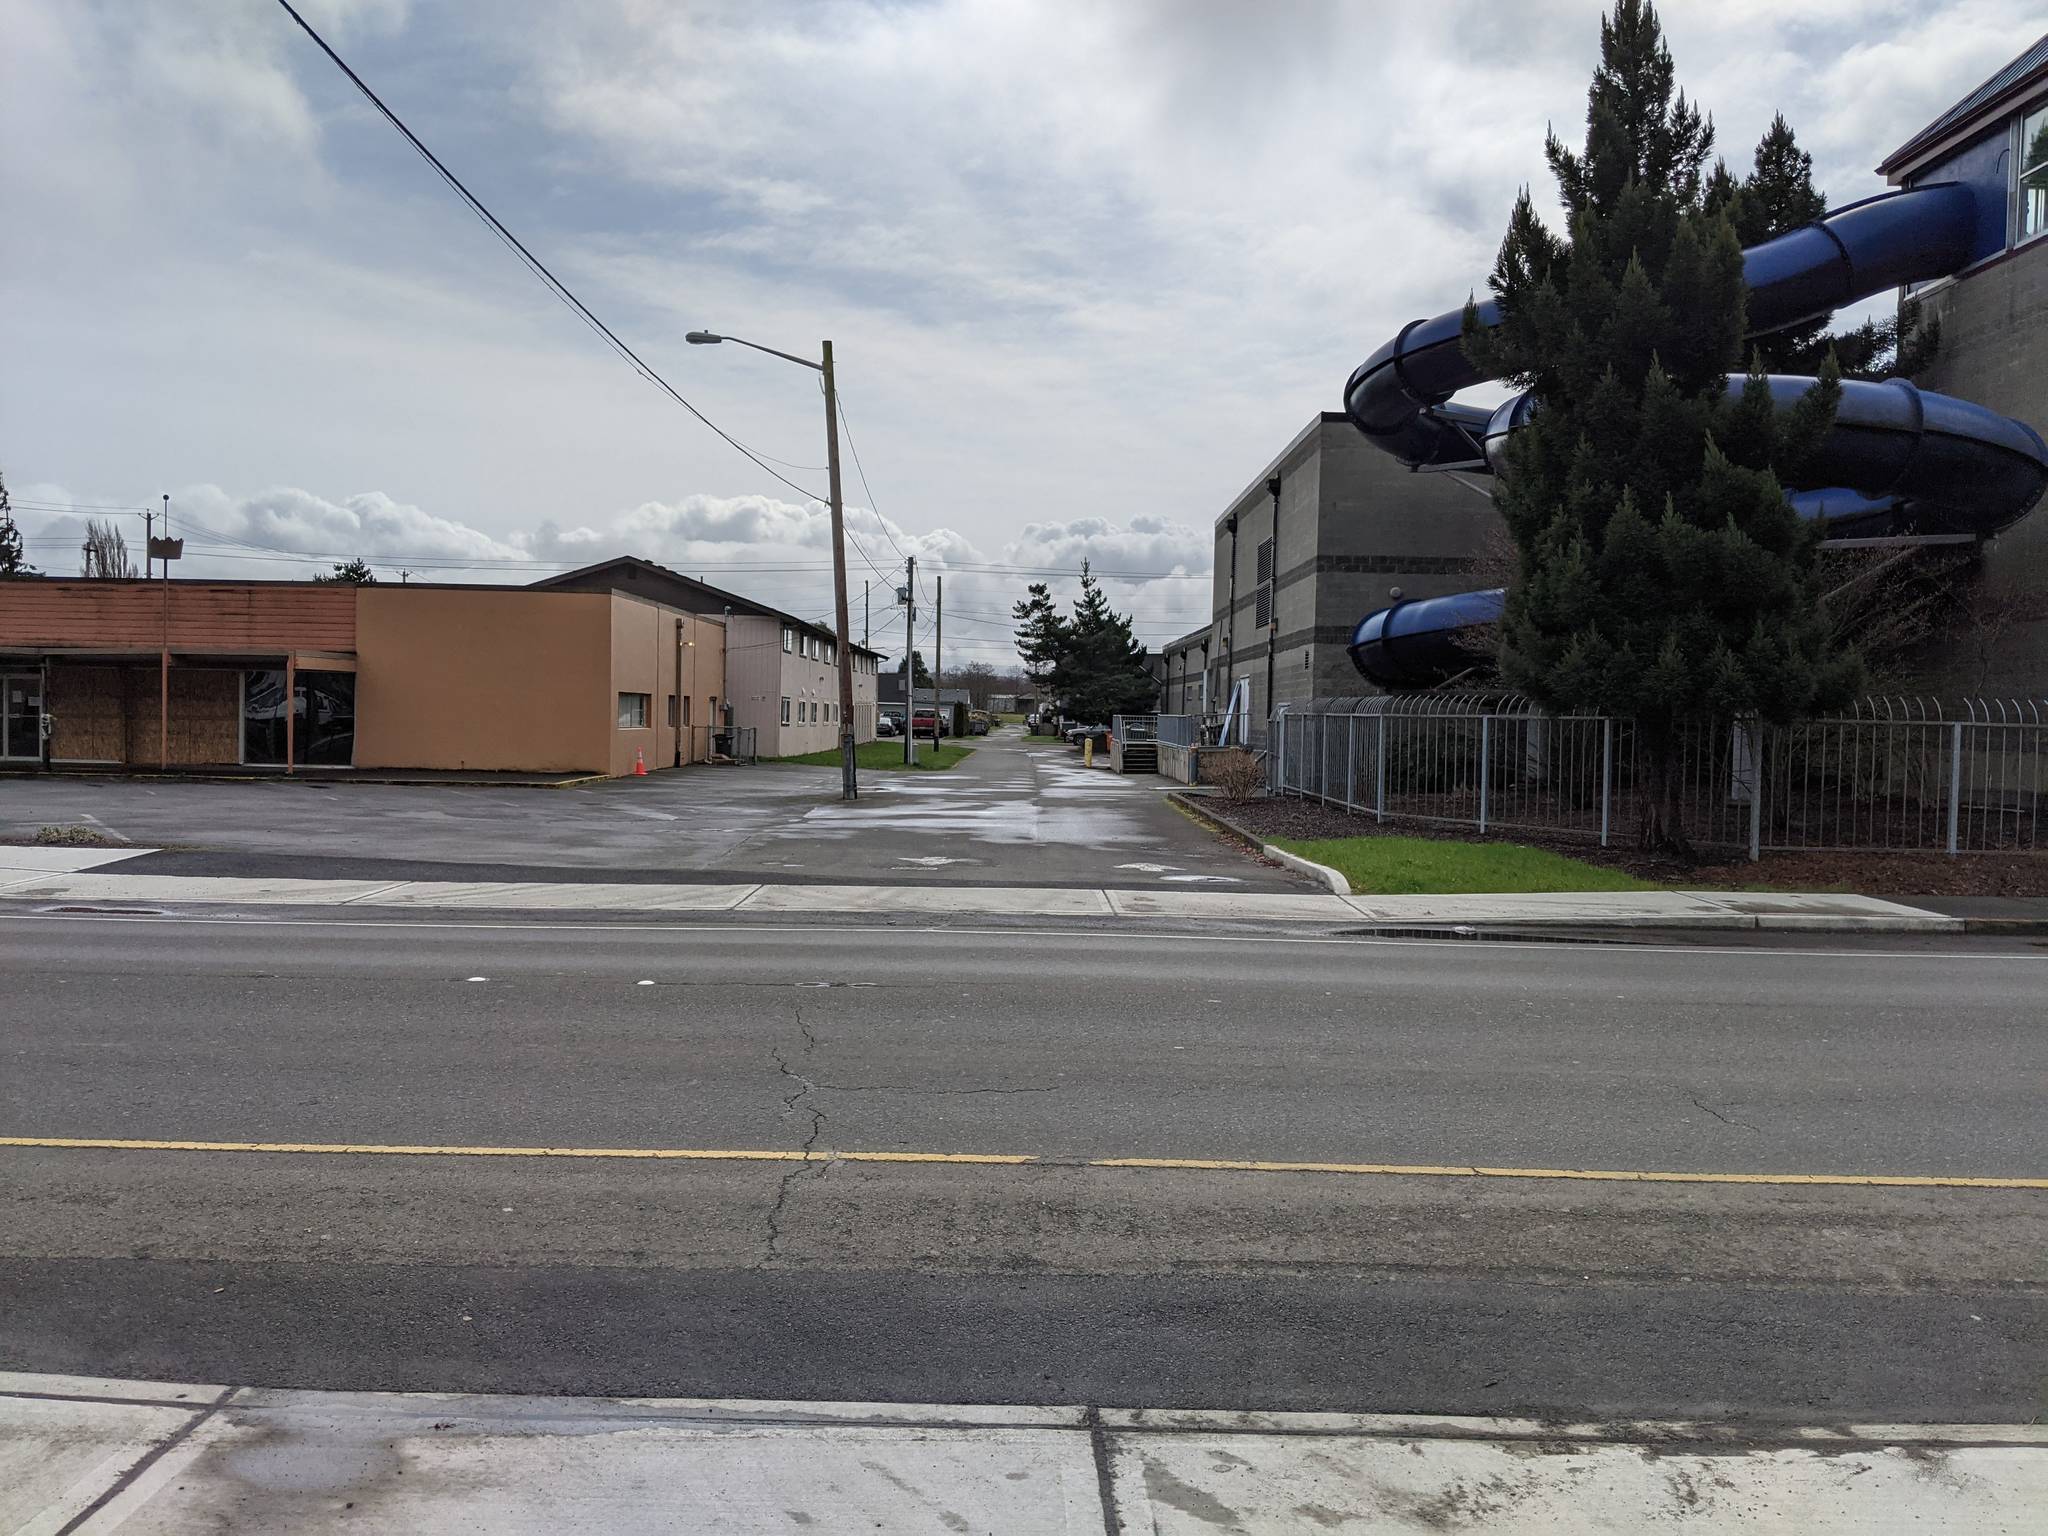 DAVE HAVILAND | THE DAILY WORLD The YMCA of Grays Harbor has requested the vacation of the alley between their building and the site of their new child care service, the former Crown Drug store.